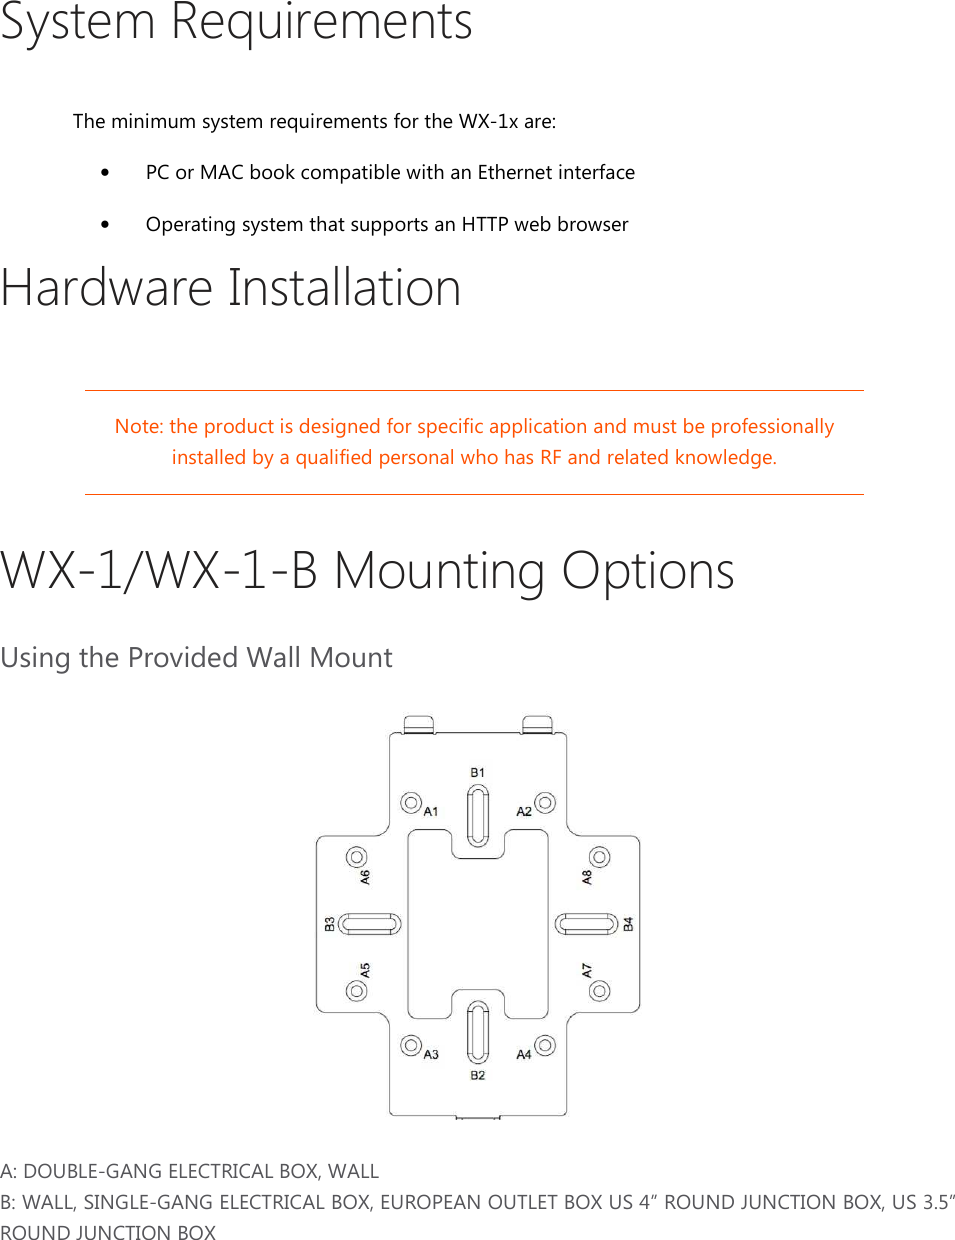 System Requirements The minimum system requirements for the WX-1x are:  • PC or MAC book compatible with an Ethernet interface • Operating system that supports an HTTP web browser Hardware Installation Note: the product is designed for specific application and must be professionally installed by a qualified personal who has RF and related knowledge.  WX-1/WX-1-B Mounting Options Using the Provided Wall Mount     A: DOUBLE-GANG ELECTRICAL BOX, WALL B: WALL, SINGLE-GANG ELECTRICAL BOX, EUROPEAN OUTLET BOX US 4” ROUND JUNCTION BOX, US 3.5” ROUND JUNCTION BOX  